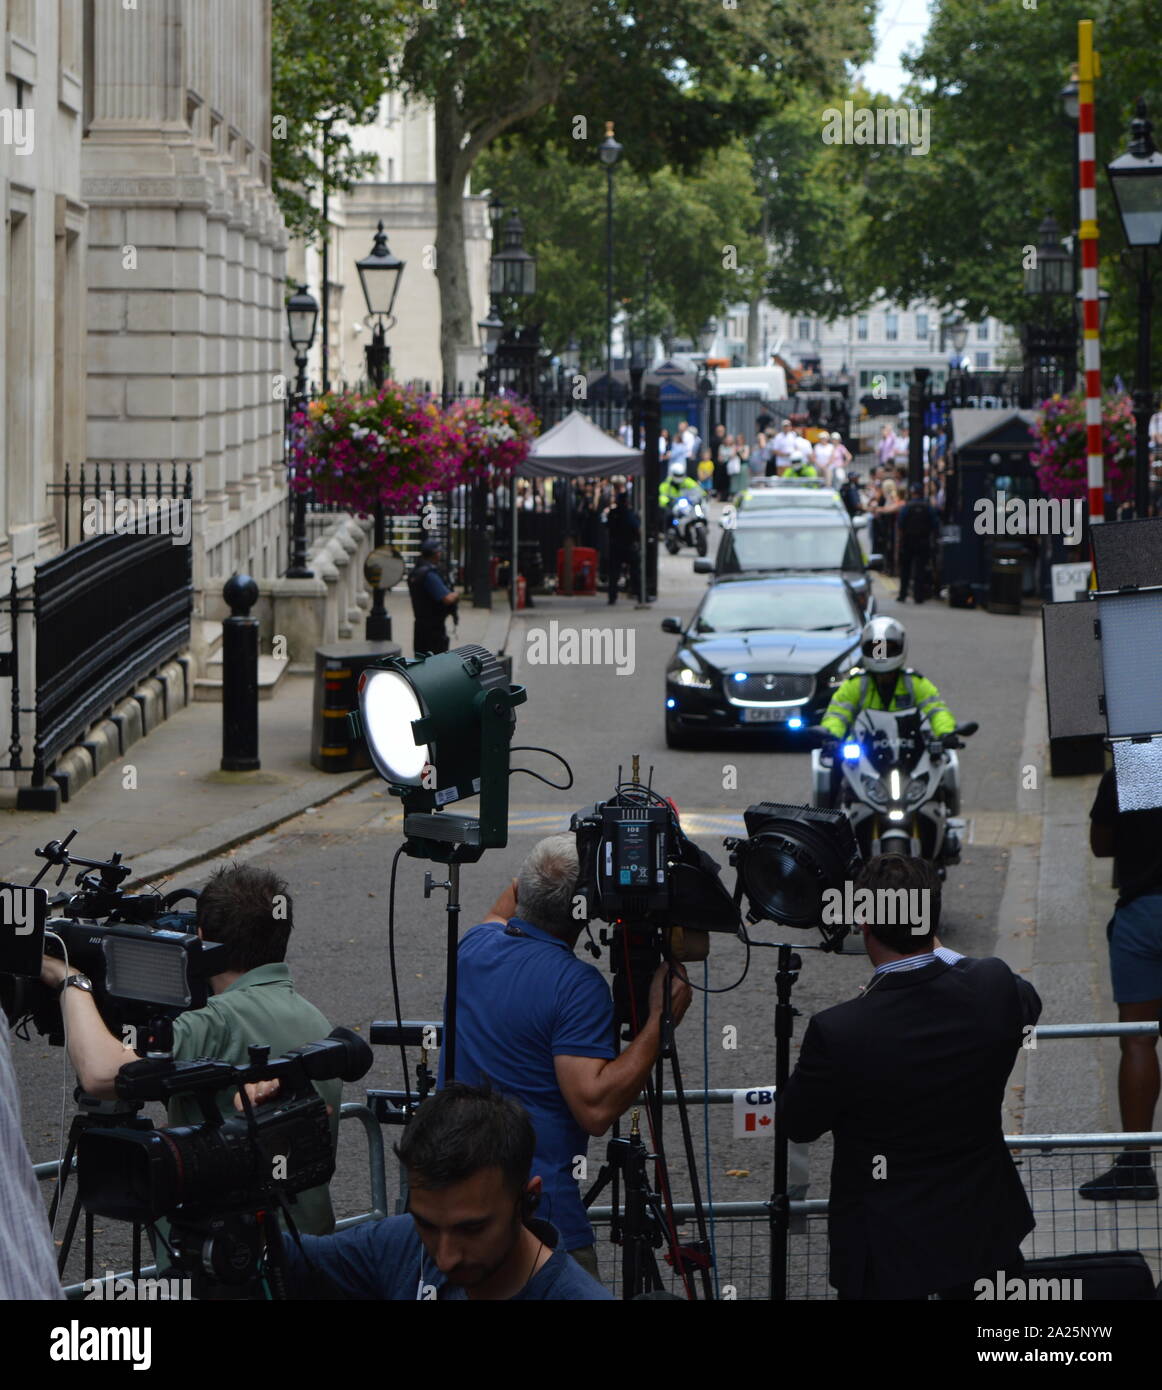 Press gathered in downing street, london, the official residences and offices of the prime minister of the united kingdom and the chancellor of the exchequer. situated off whitehall, a few minutes' walk from the houses of parliament, downing street was built in the 1680s by sir george downing. Stock Photo